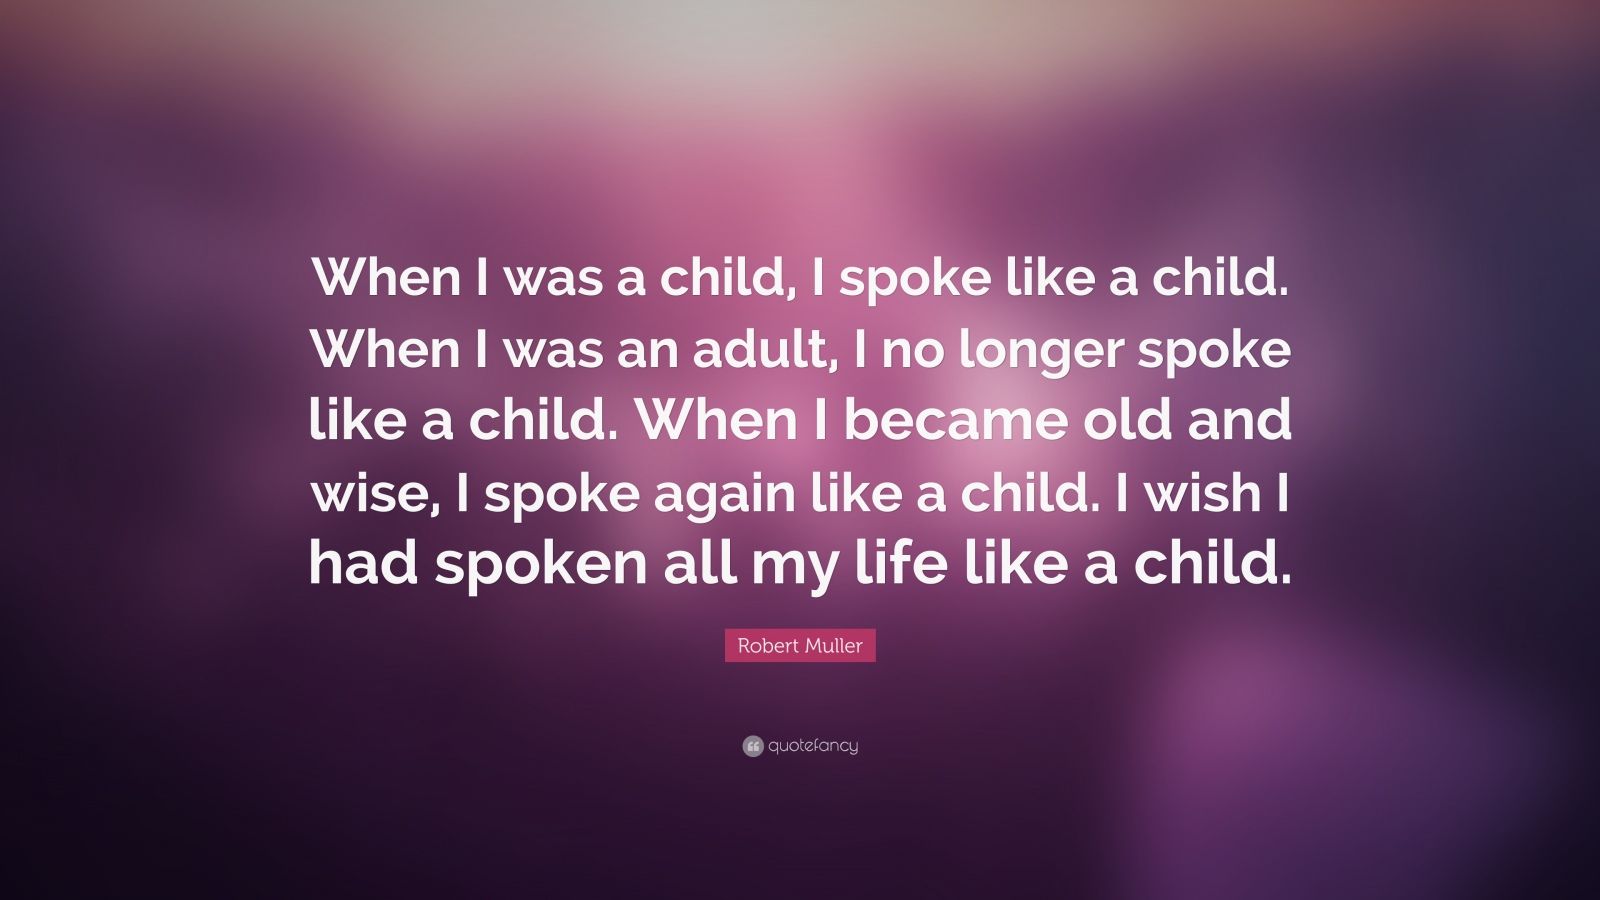 Robert Muller Quote: “When I was a child, I spoke like a child. When I ...